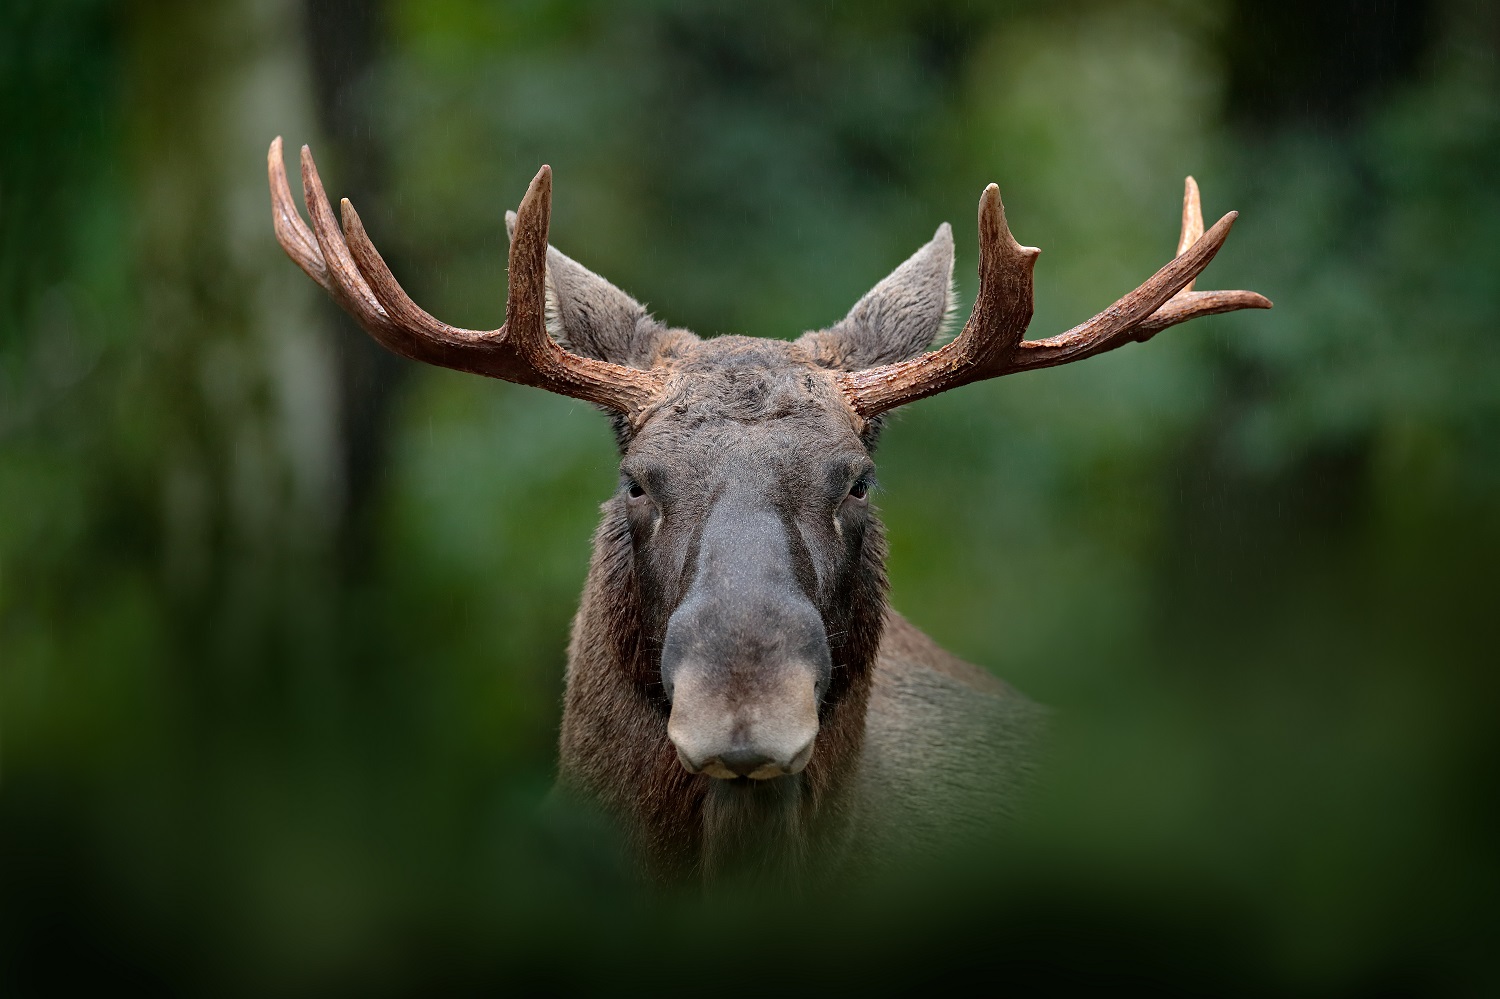 A male moose standing in a dewy forest looking directly at camera